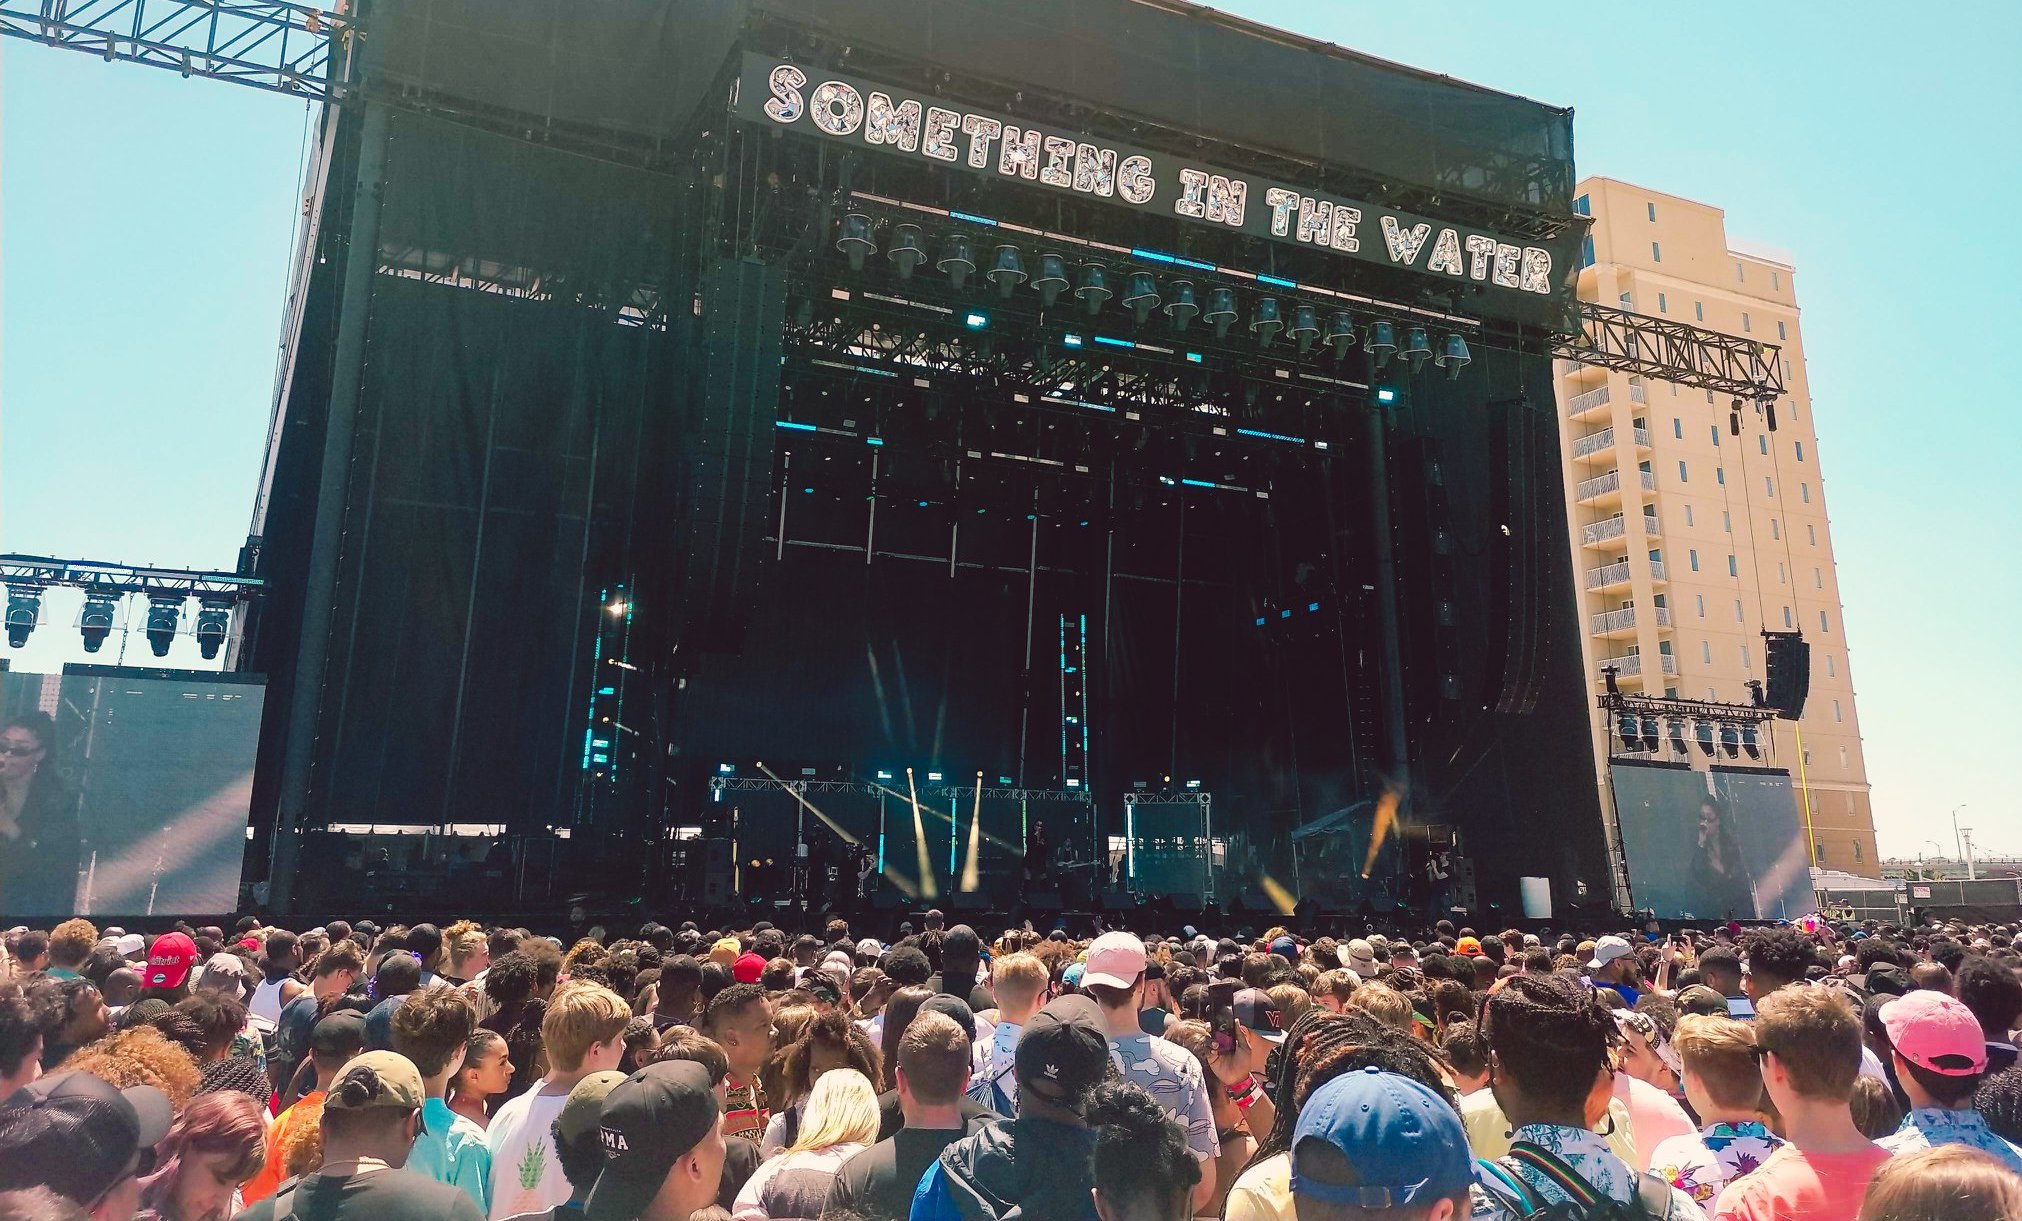 Pharrell Williams' Something in the Water festival coming to DC on